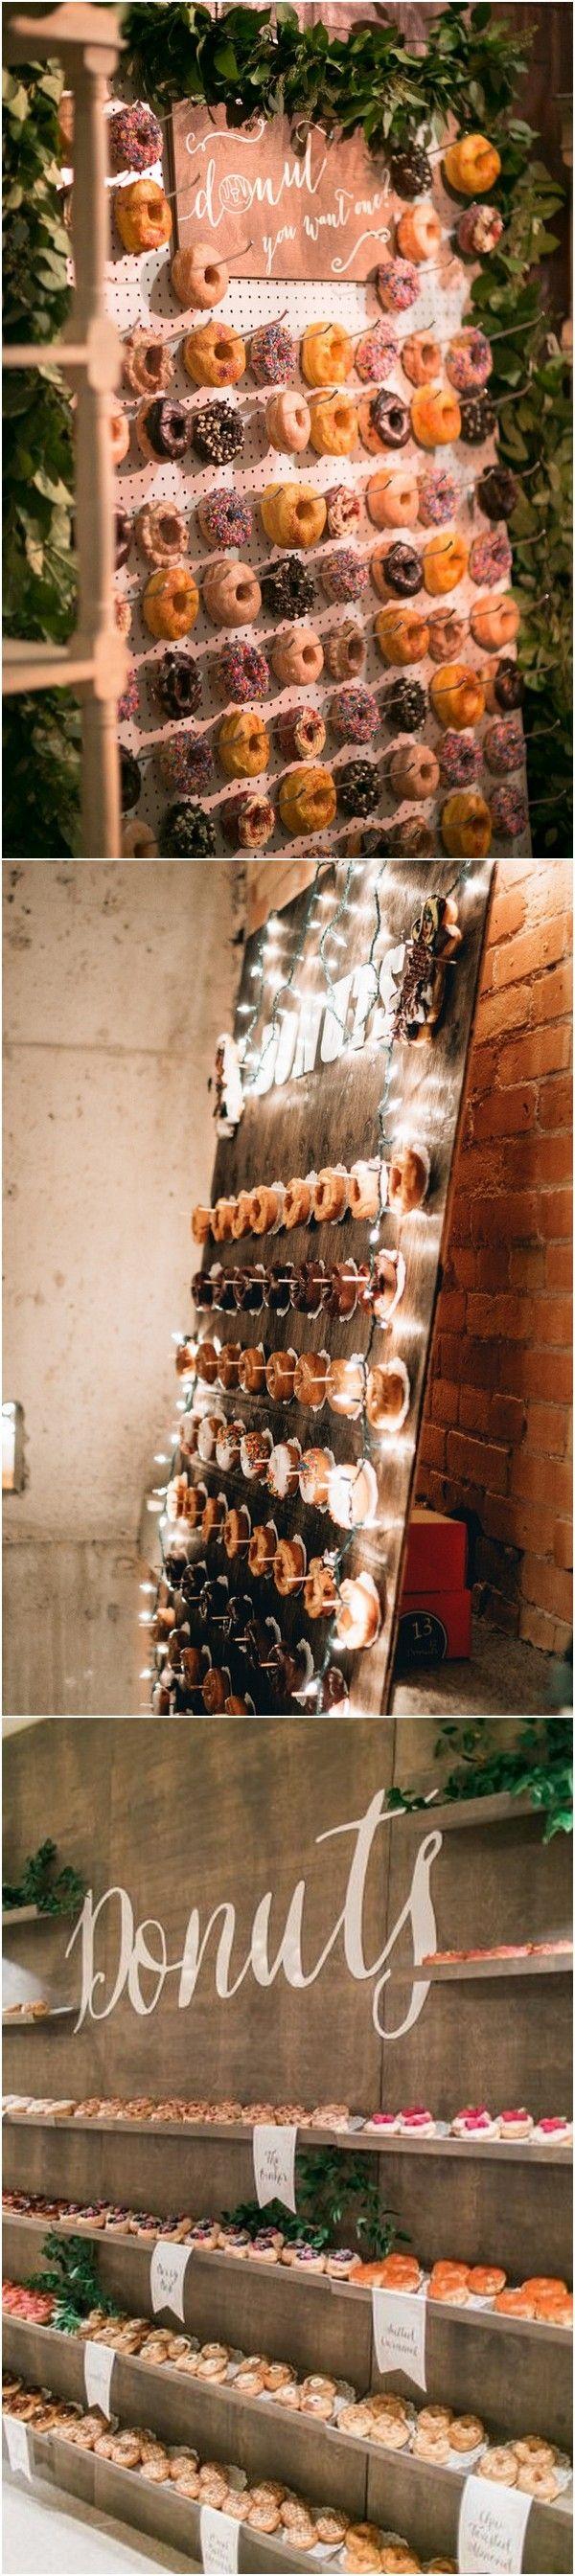 Wedding - Trending-20 Perfect Wedding Donuts Display Ideas - Page 2 Of 4